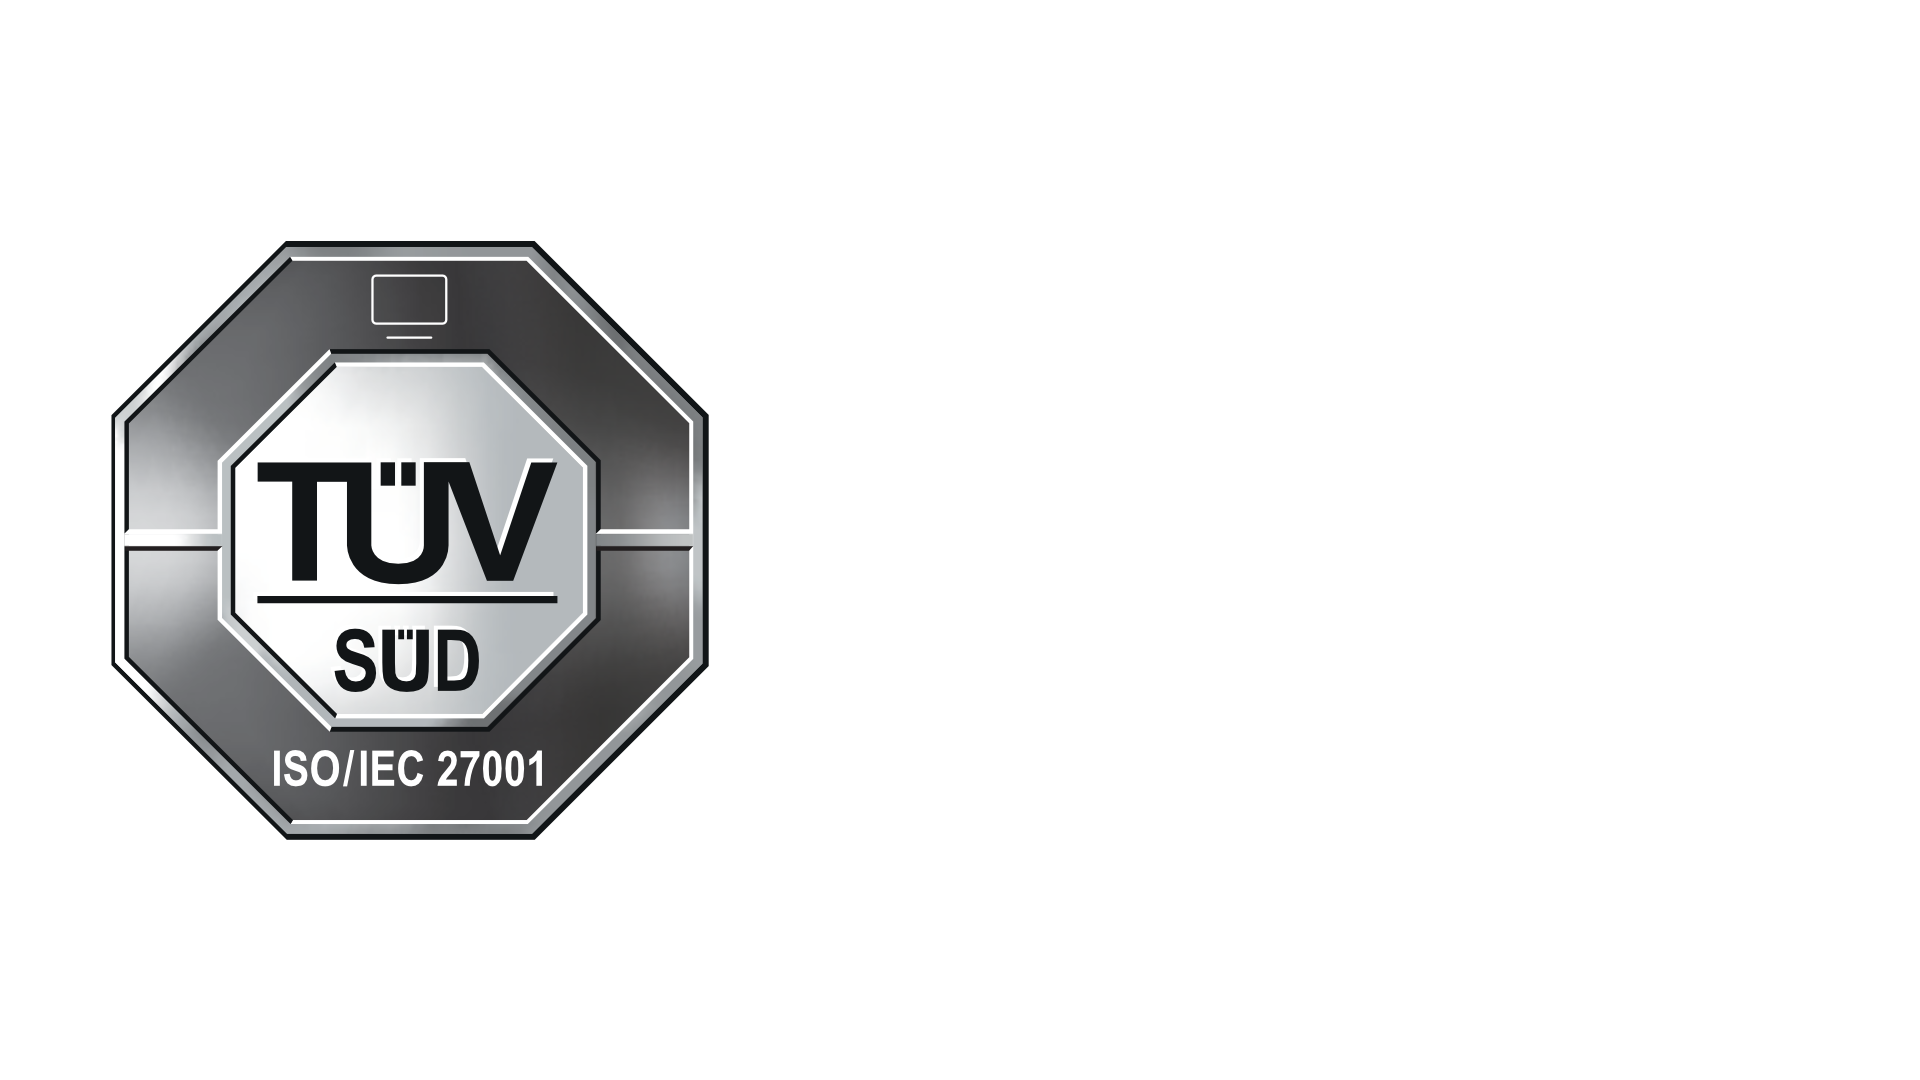 Certificate for ISO 27001 by TÜV Süd